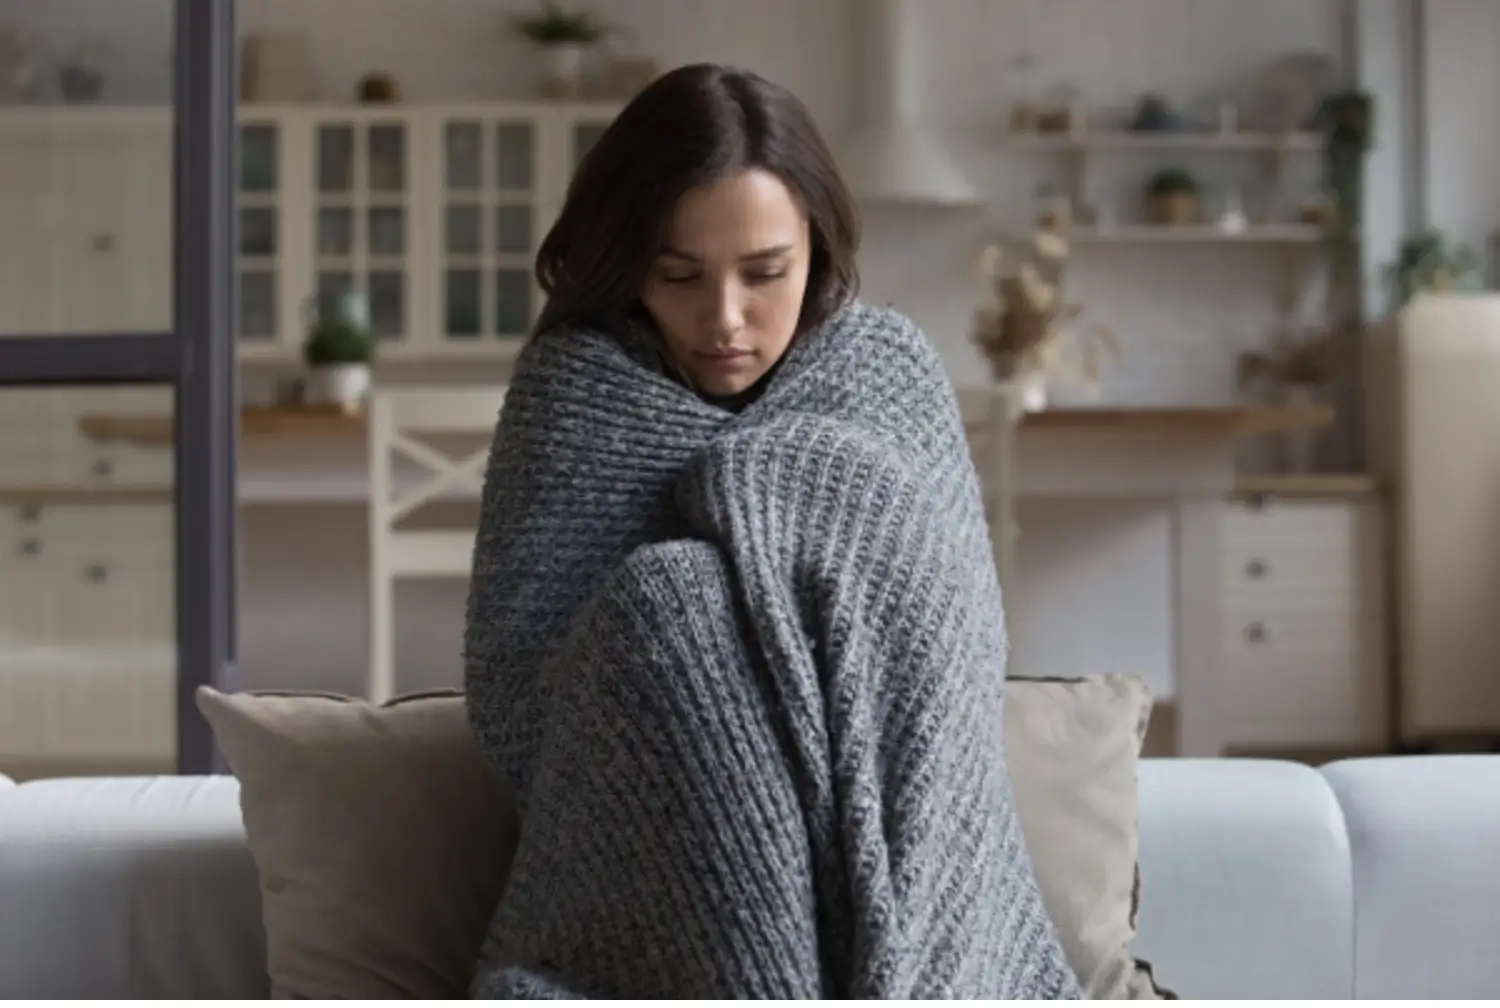 Woman going through Paxil withdrawal wrapped in a blanket with sad look on her face